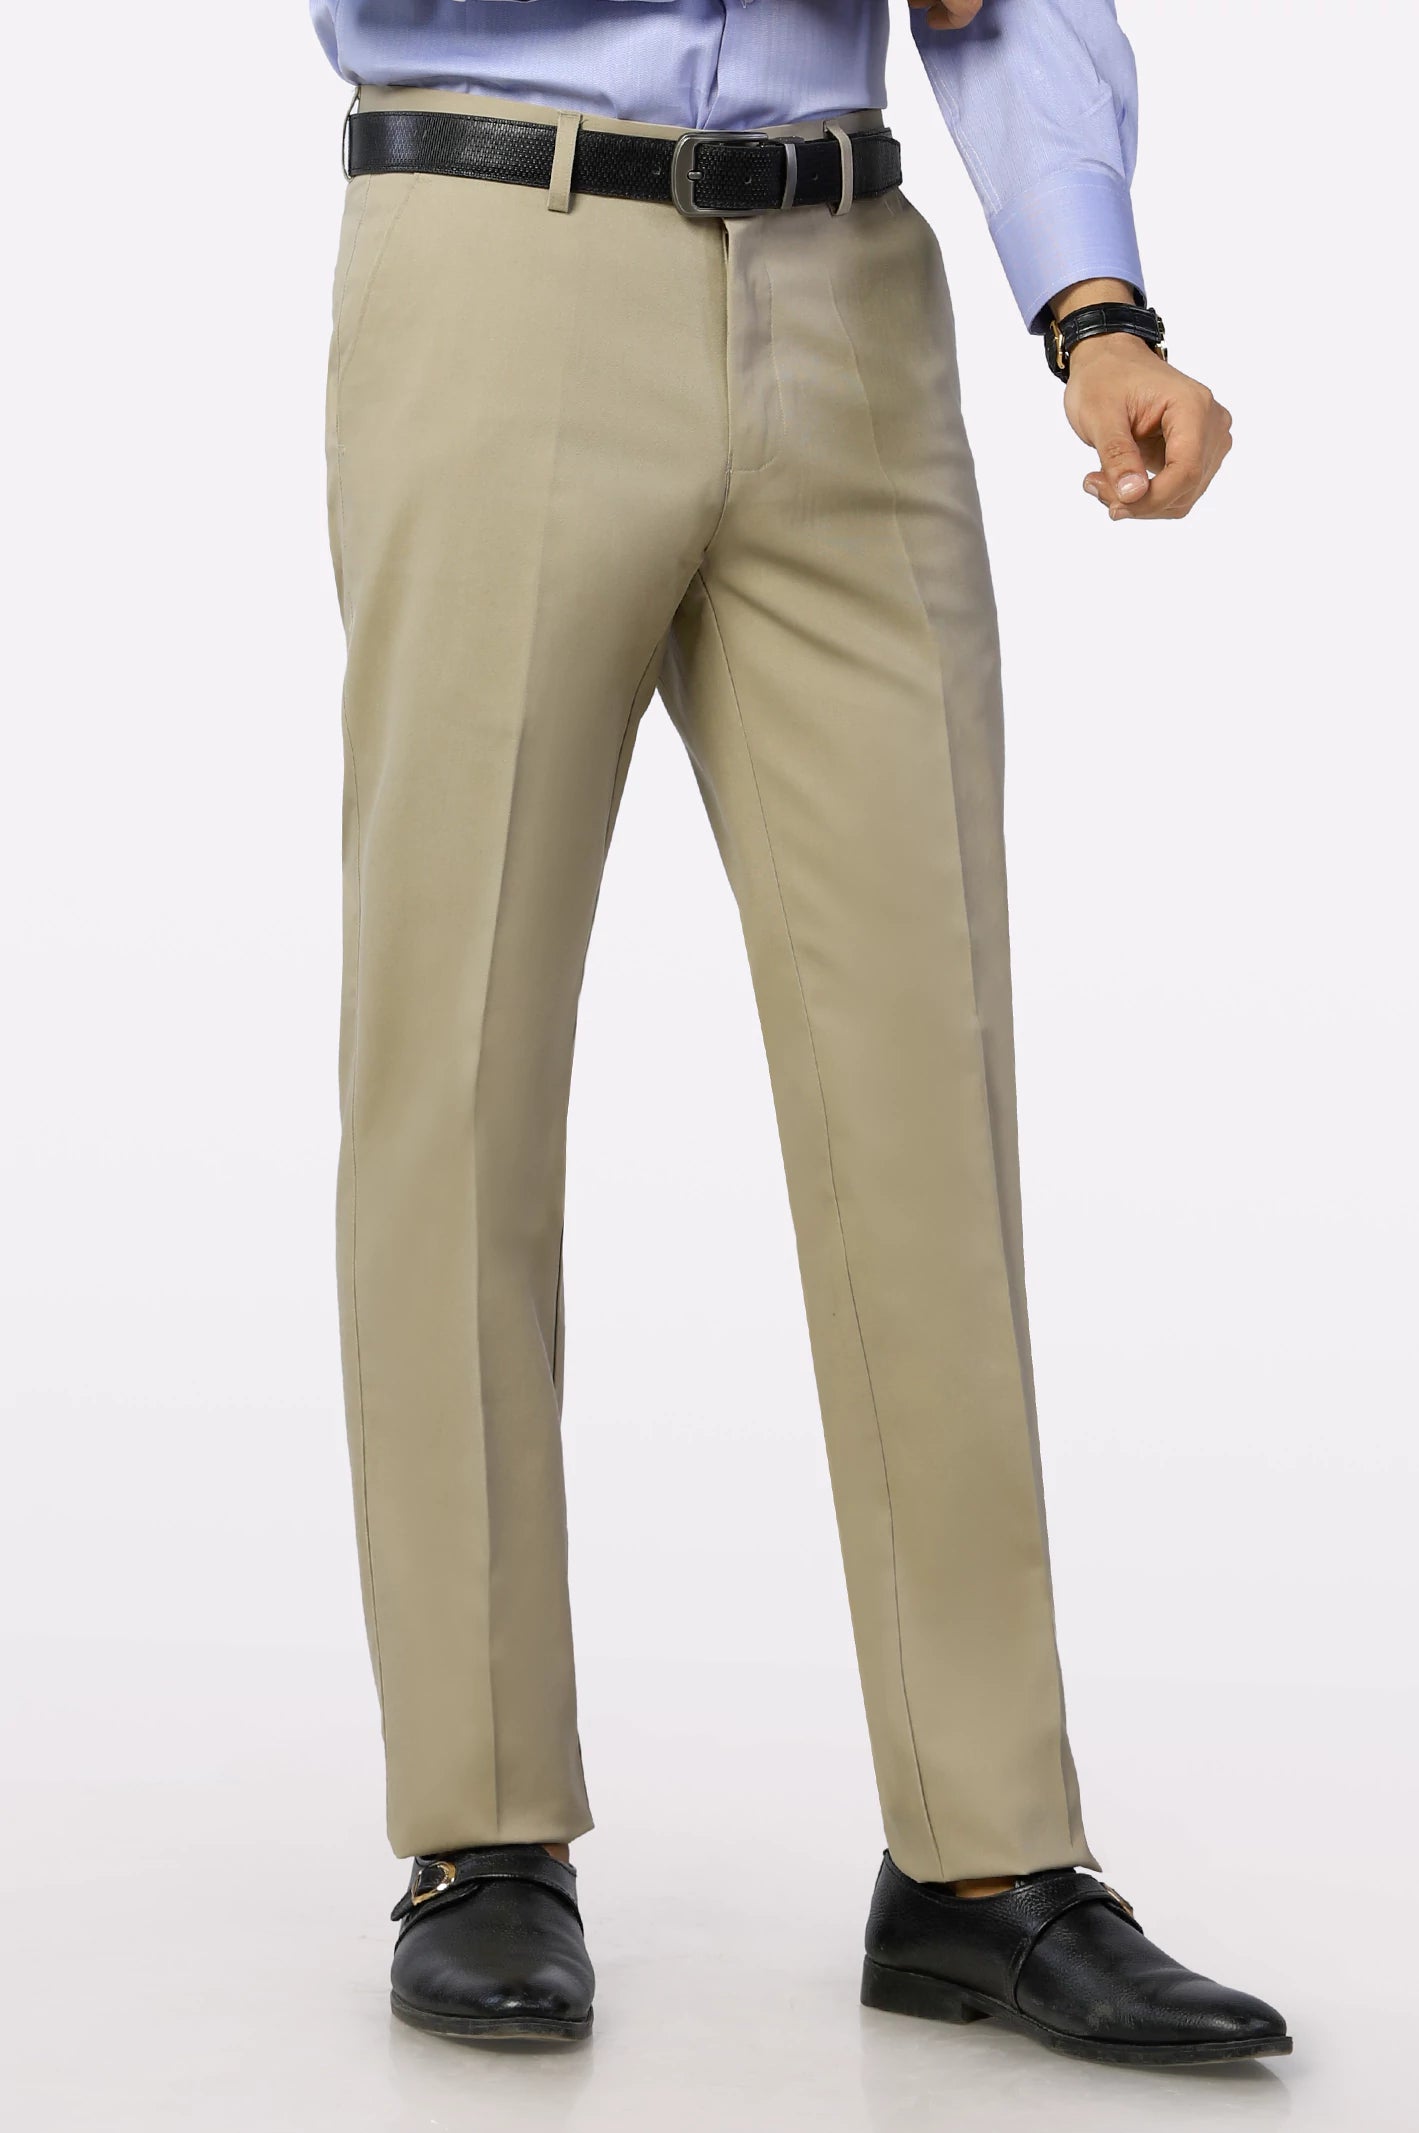 Khaki Regular Fit Cotton Trouser From Diners